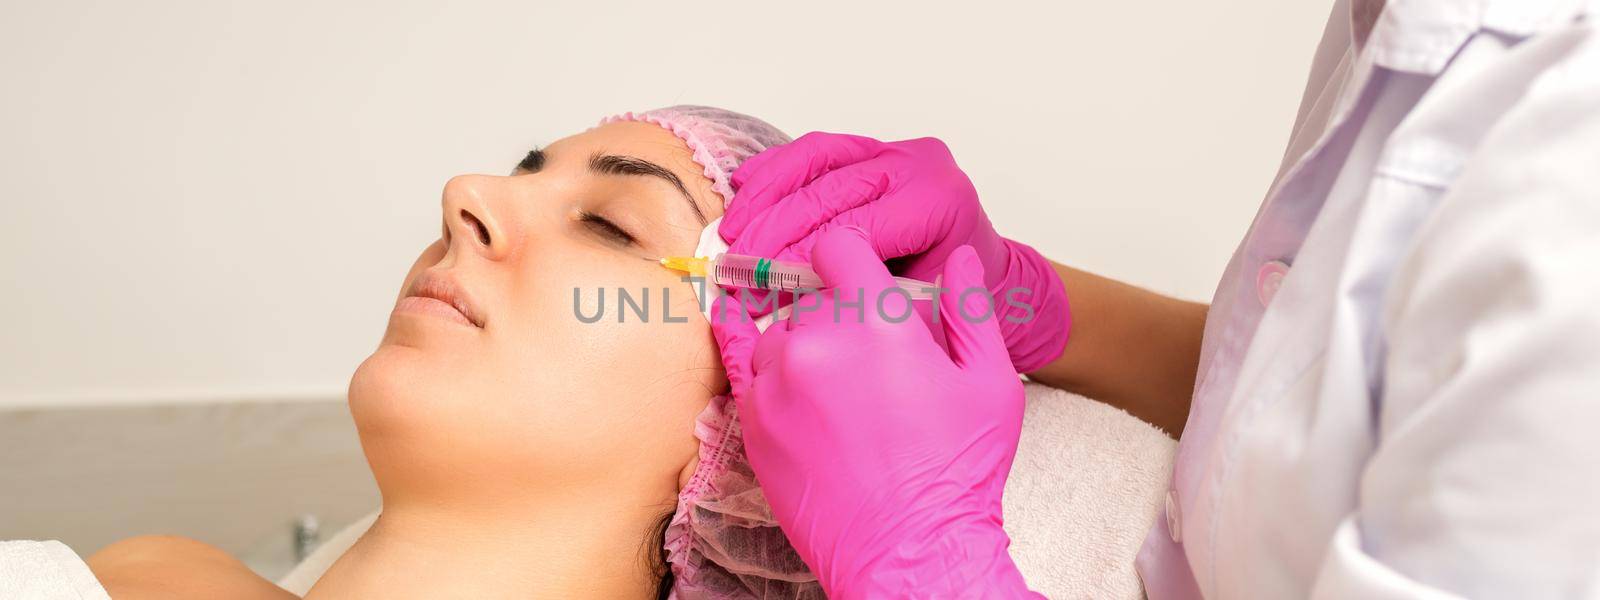 The young white woman is getting rejuvenating facial injections with hyaluronic acid on the eye in a beauty clinic